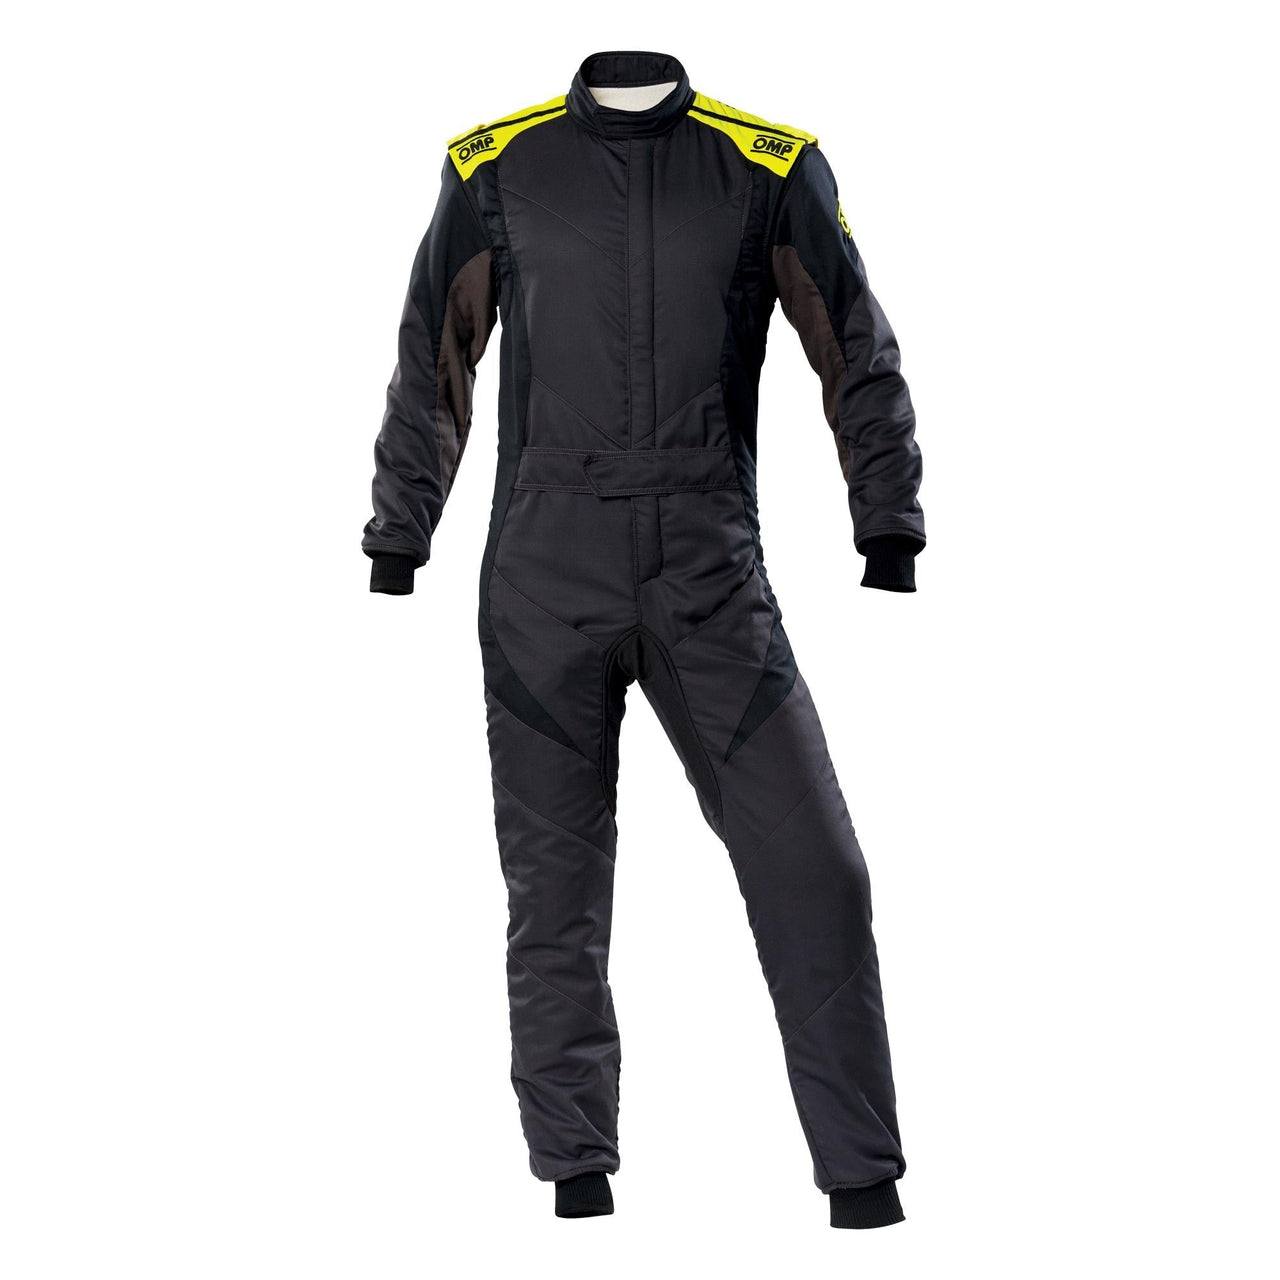 OMP FIRST Evo Fire Suit